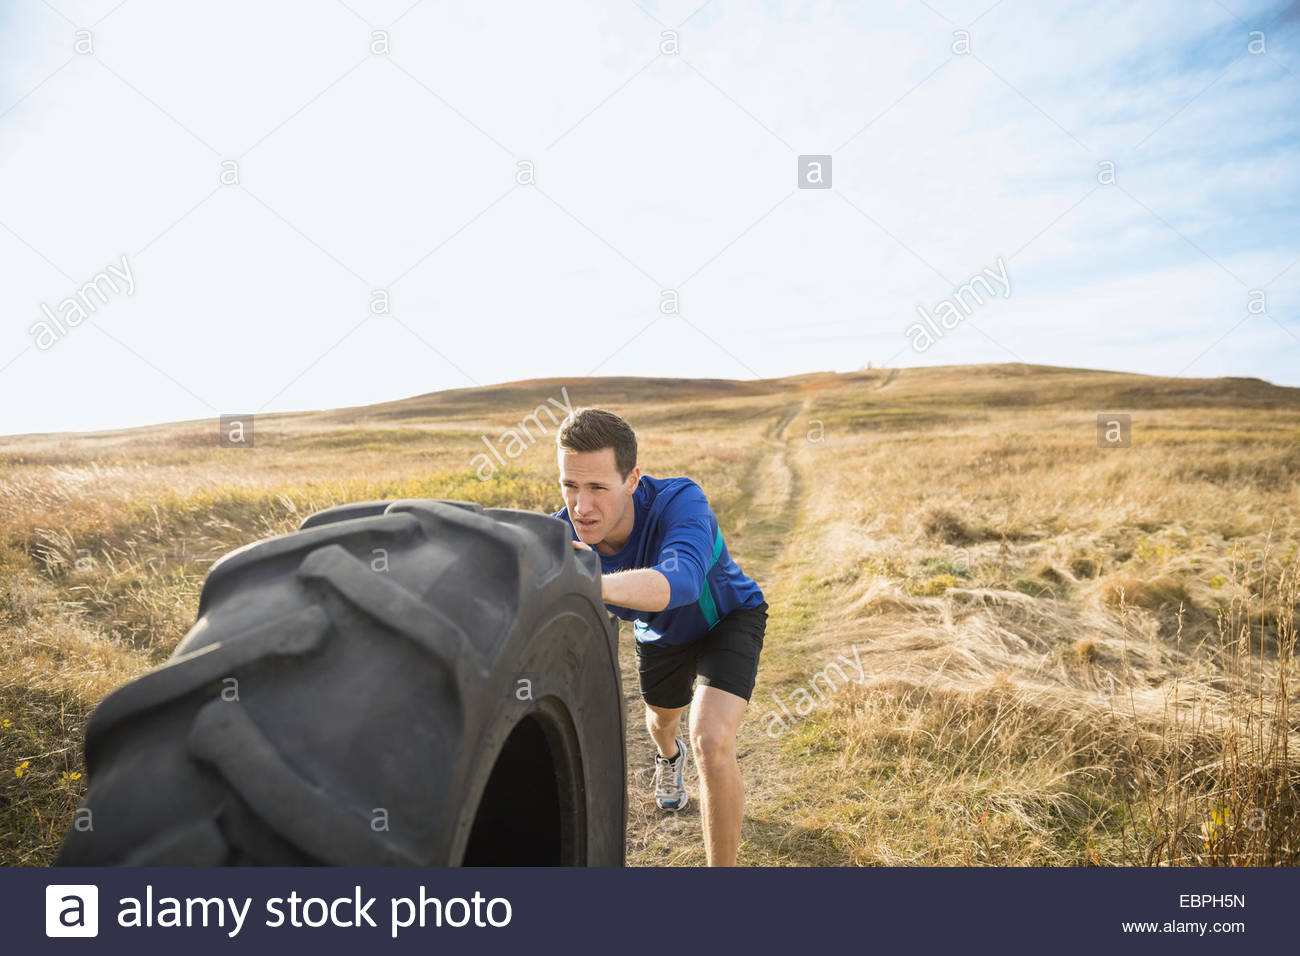 Man pushing crossfit tire in sunny rural field Stock Photo